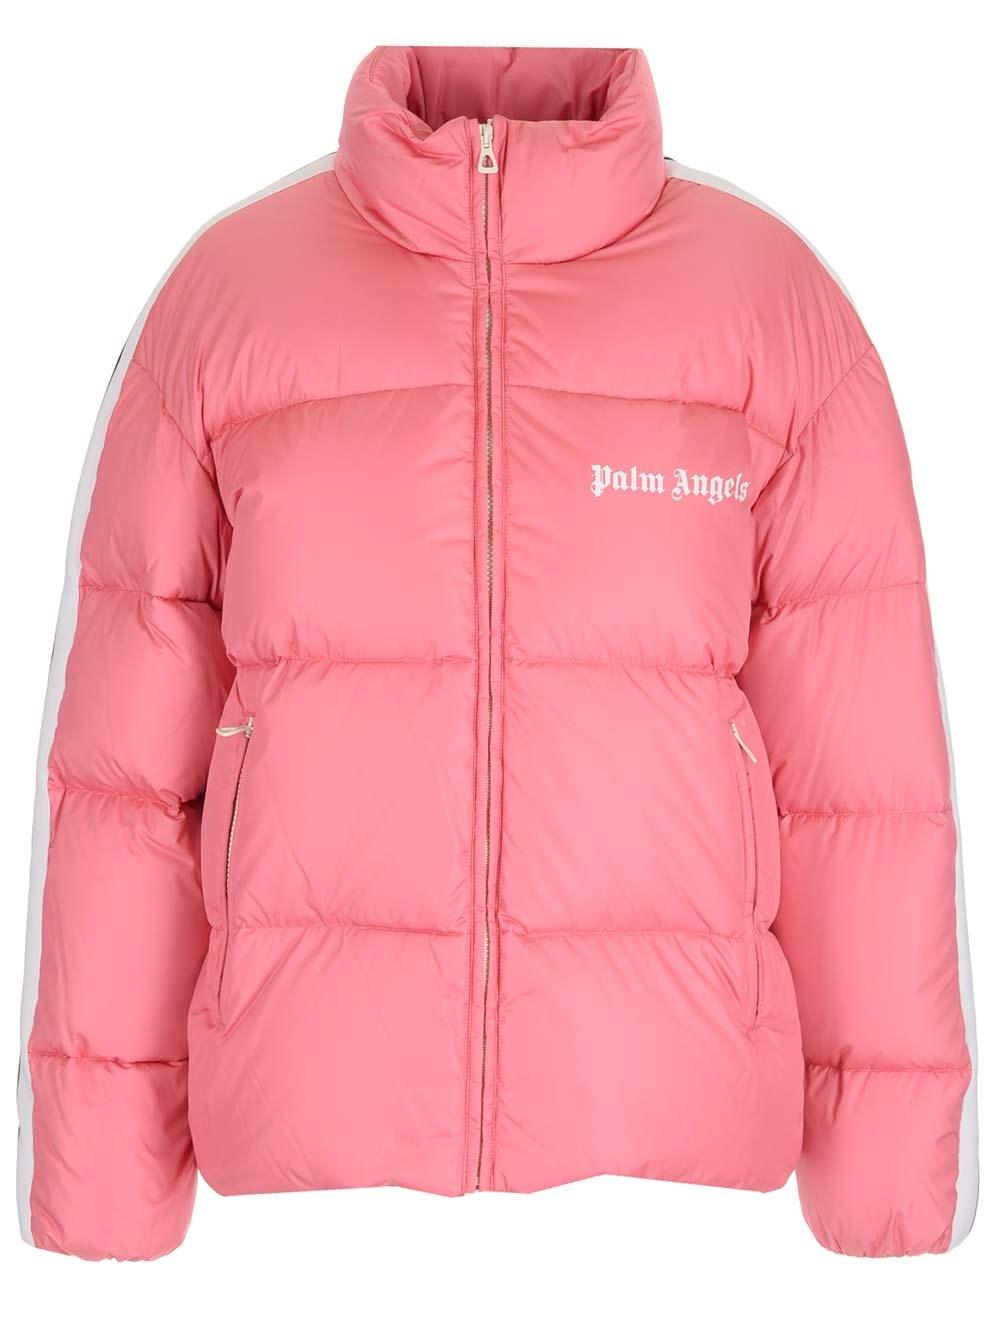 Palm Angels Volume Puffer Jacket in Pink | Lyst